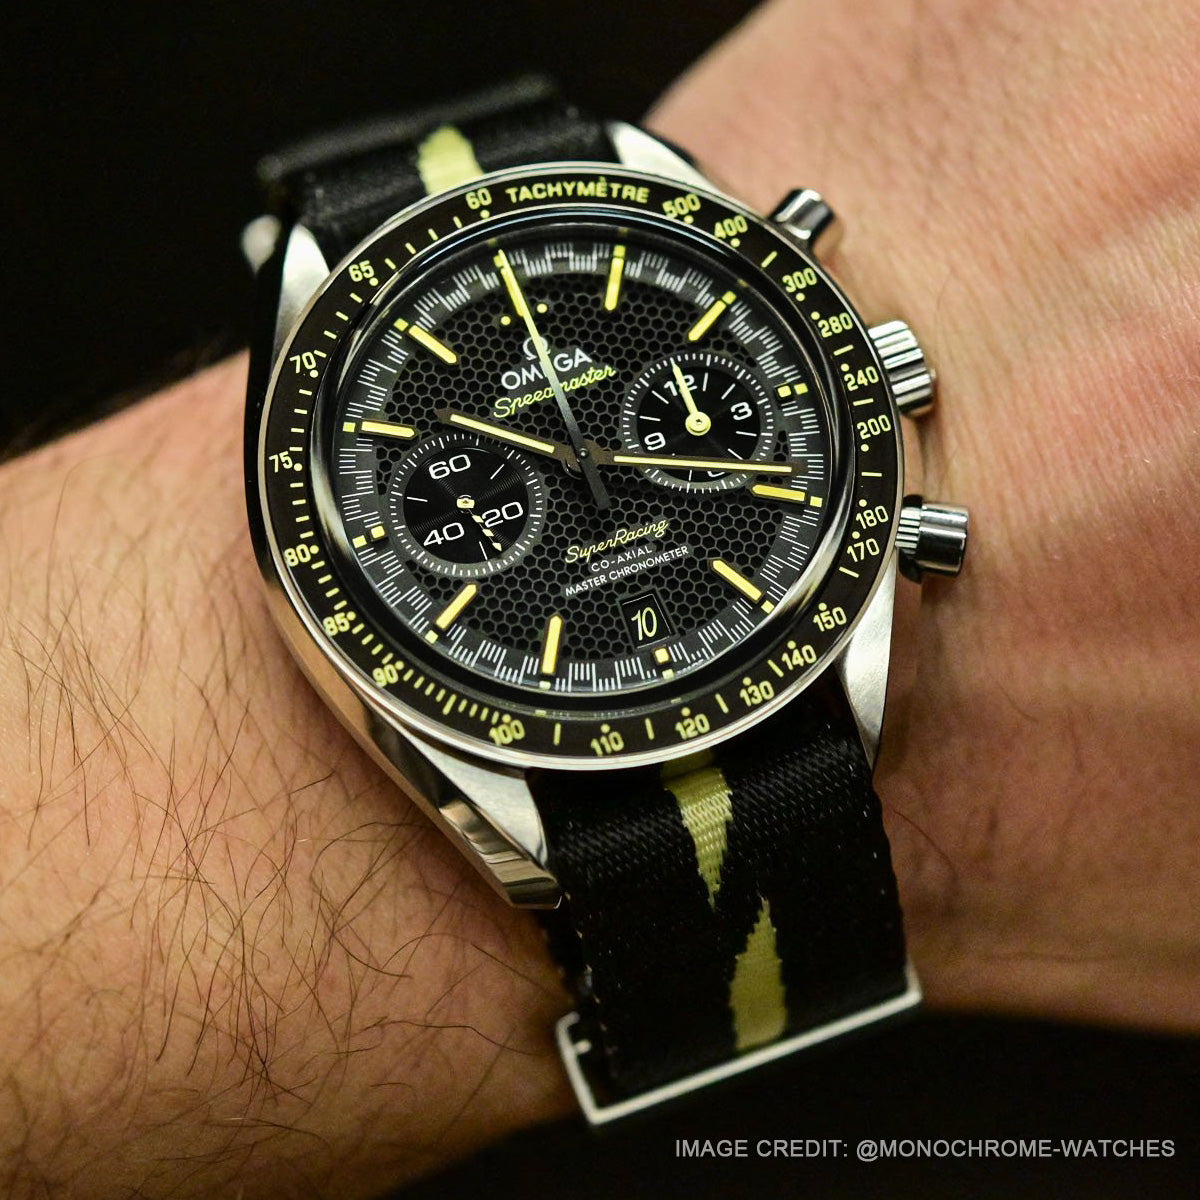 Omega Speedmaster Super Racing 329.30.44.51.01.003 with the Powerful Innovative Spirate System